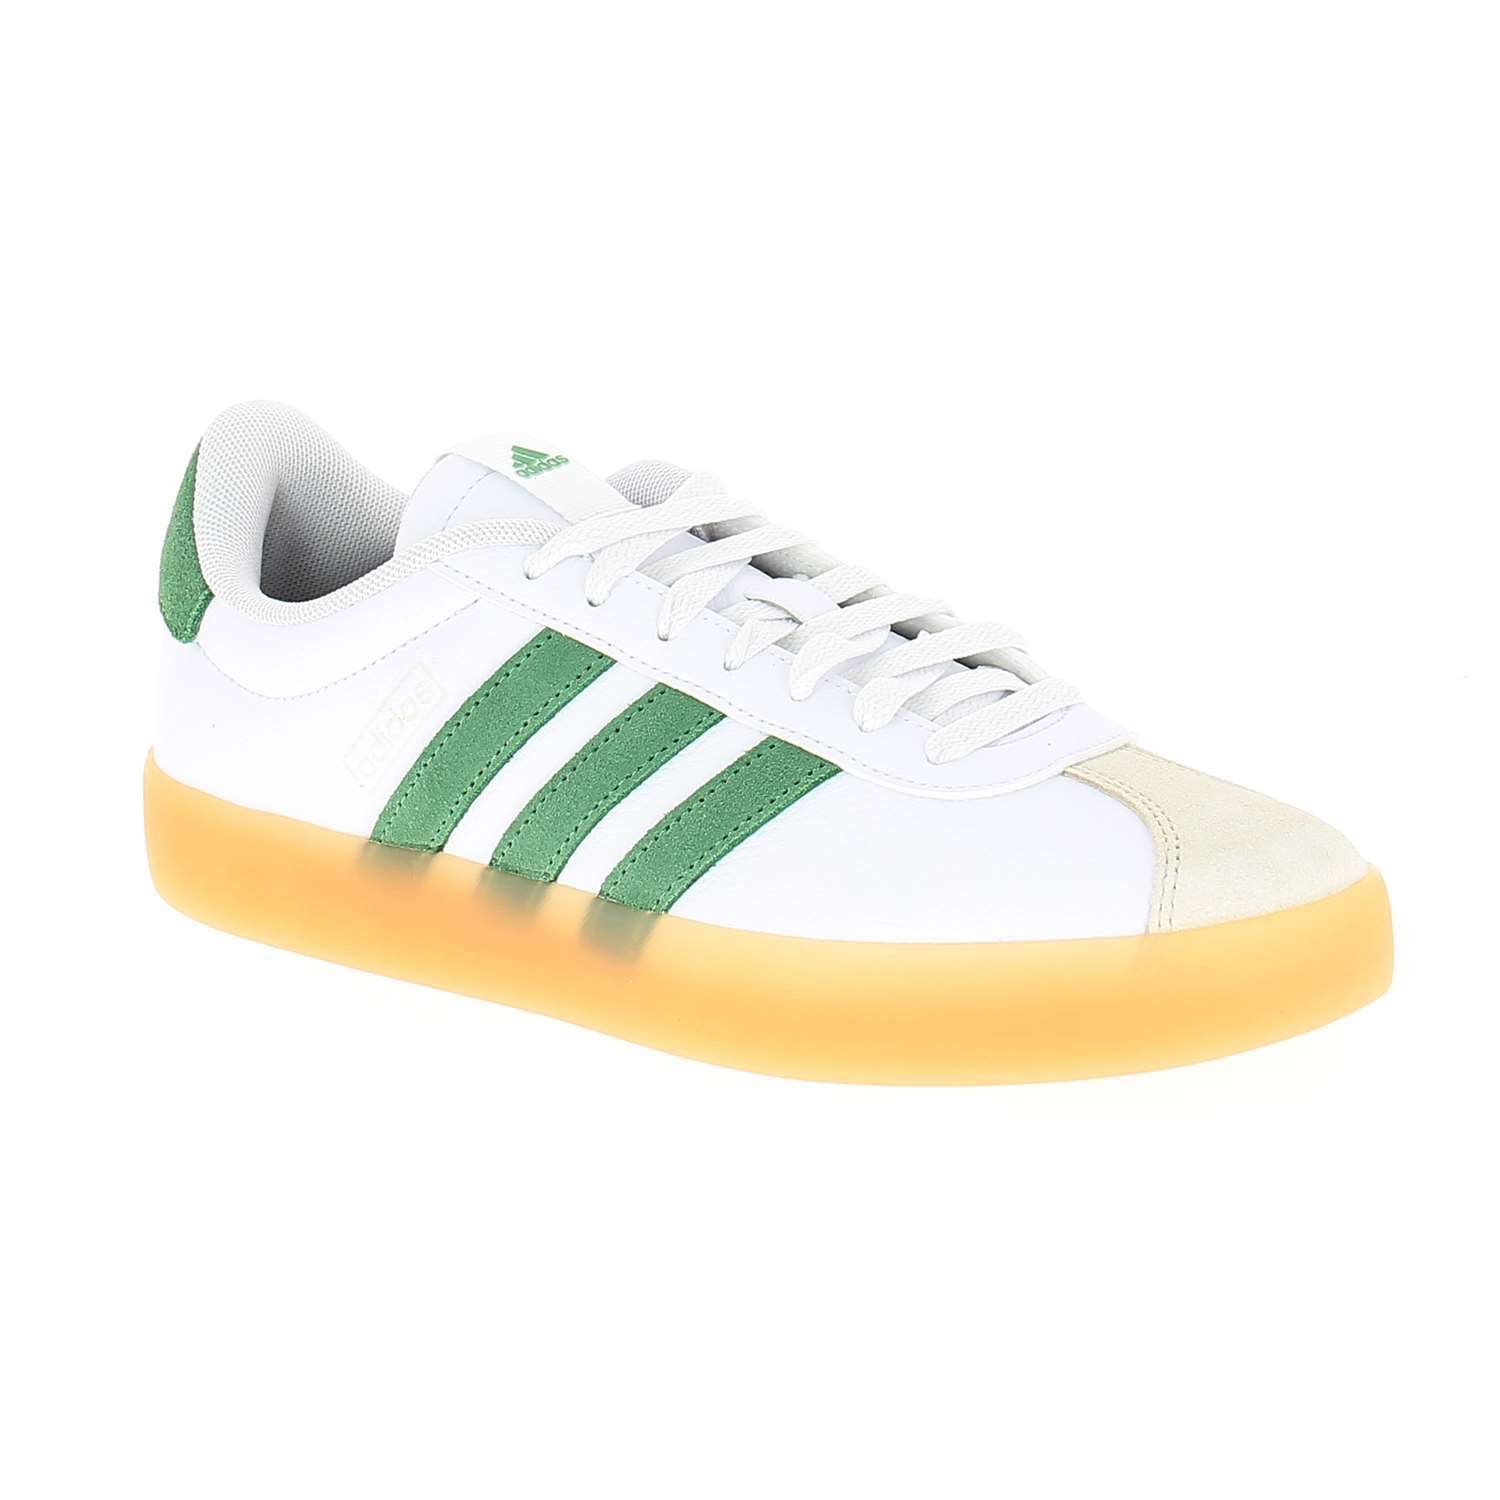 01 - VL COURT 3.0 - ADIDAS -  - Synthétique